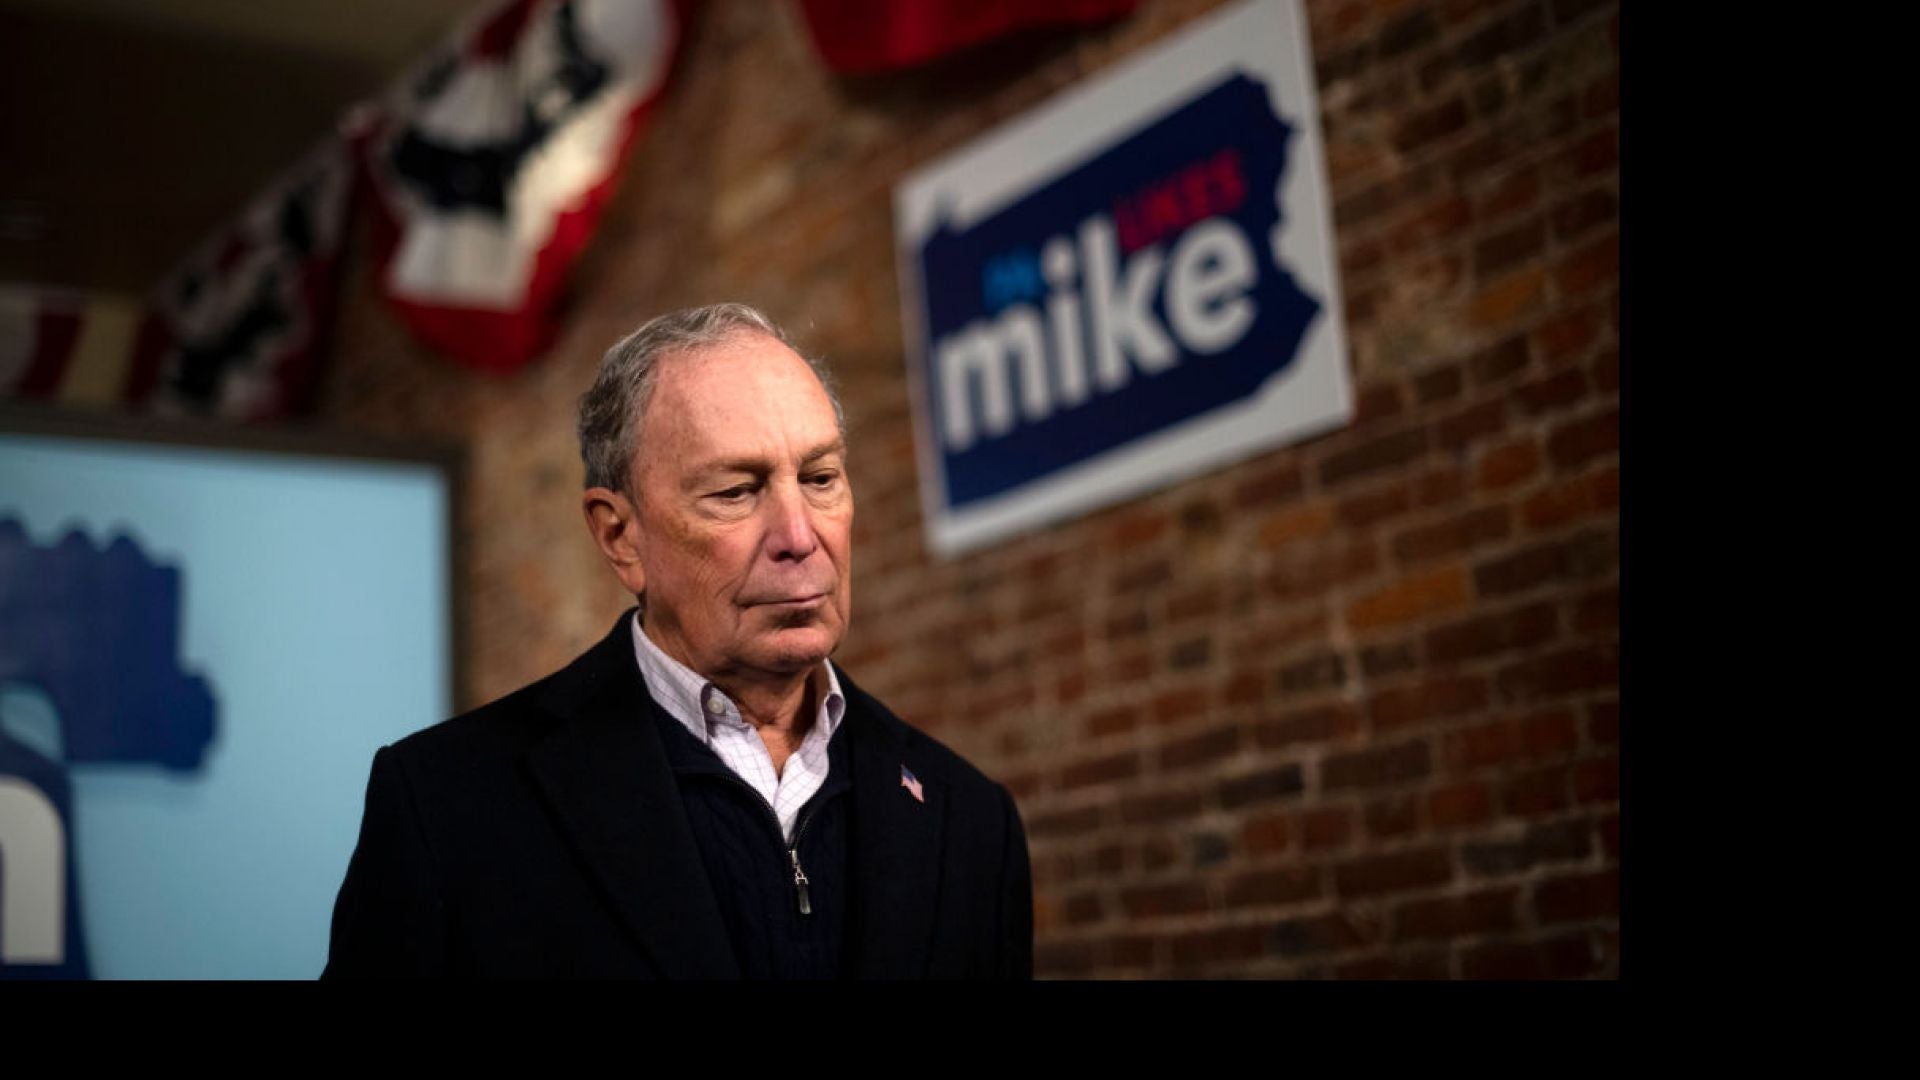 Bloomberg Under Scrutiny After Video Shows Him Calling Trans Women 'It'